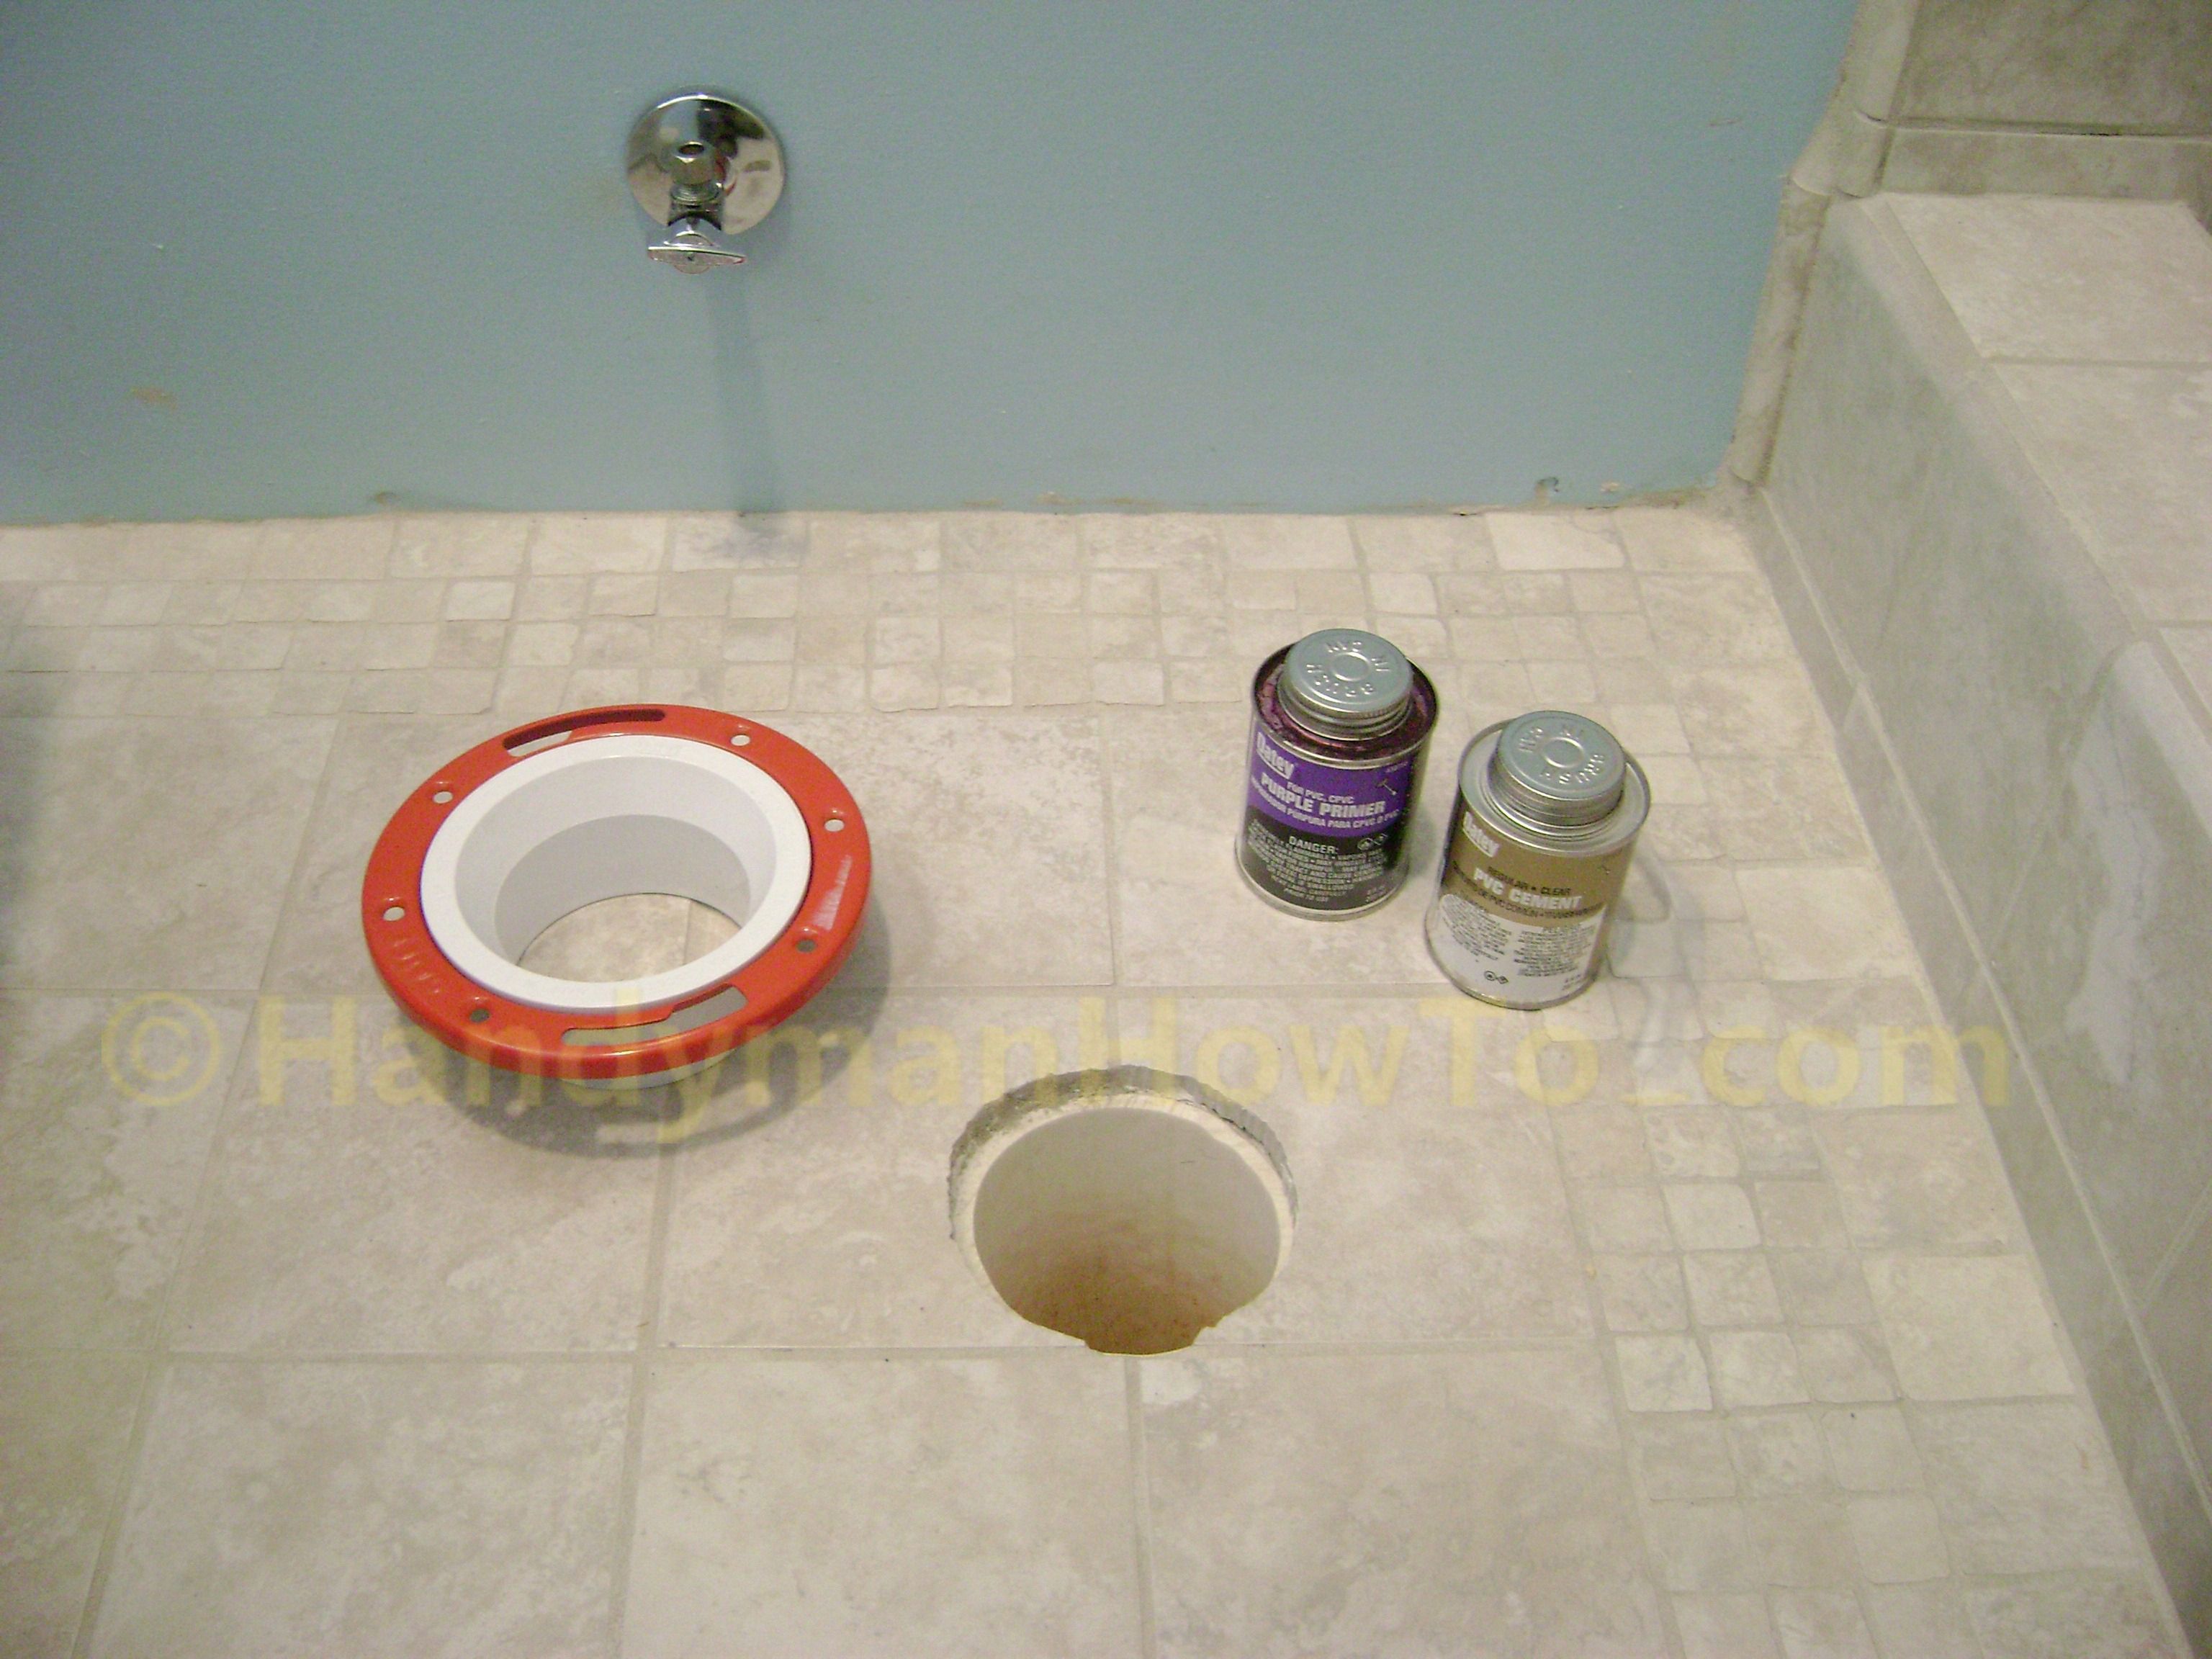 How To Finish A Basement Bathroom Install The Toilet